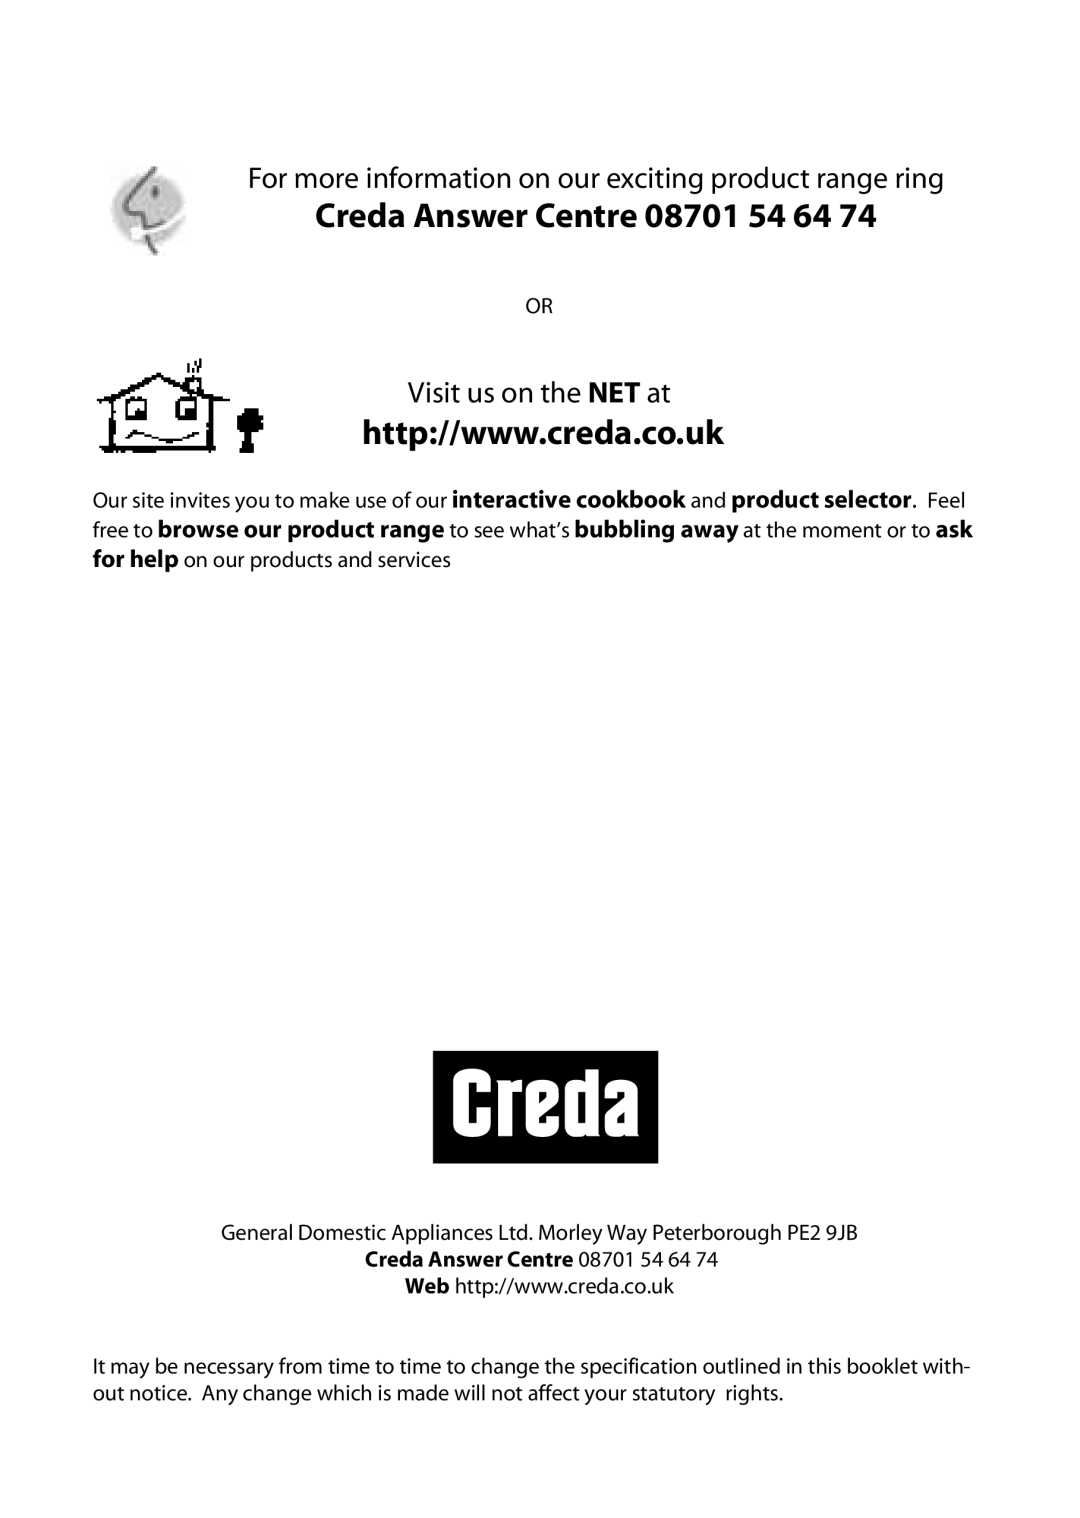 Creda H250E manual Creda Answer Centre, For more information on our exciting product range ring, Visit us on the NET at 